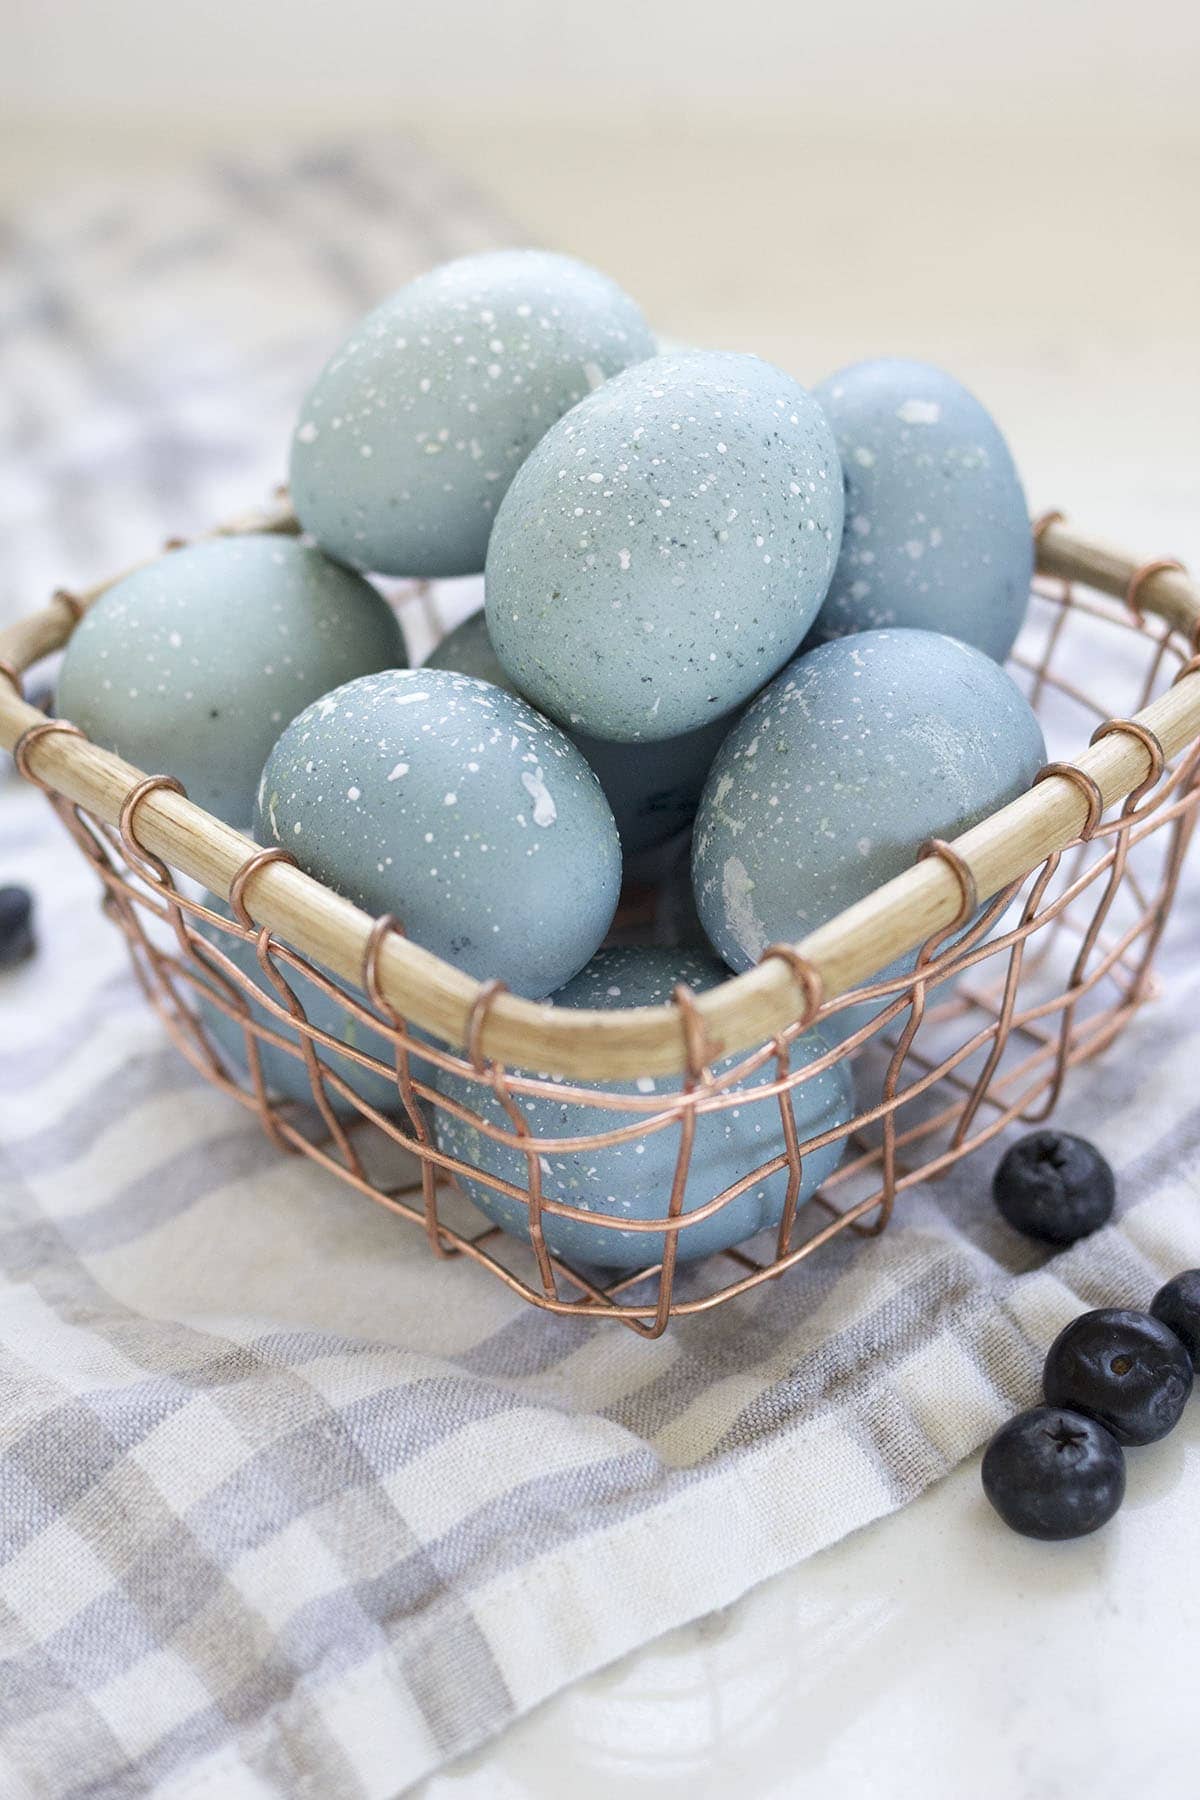 How to Dye Easter Eggs with Blueberries